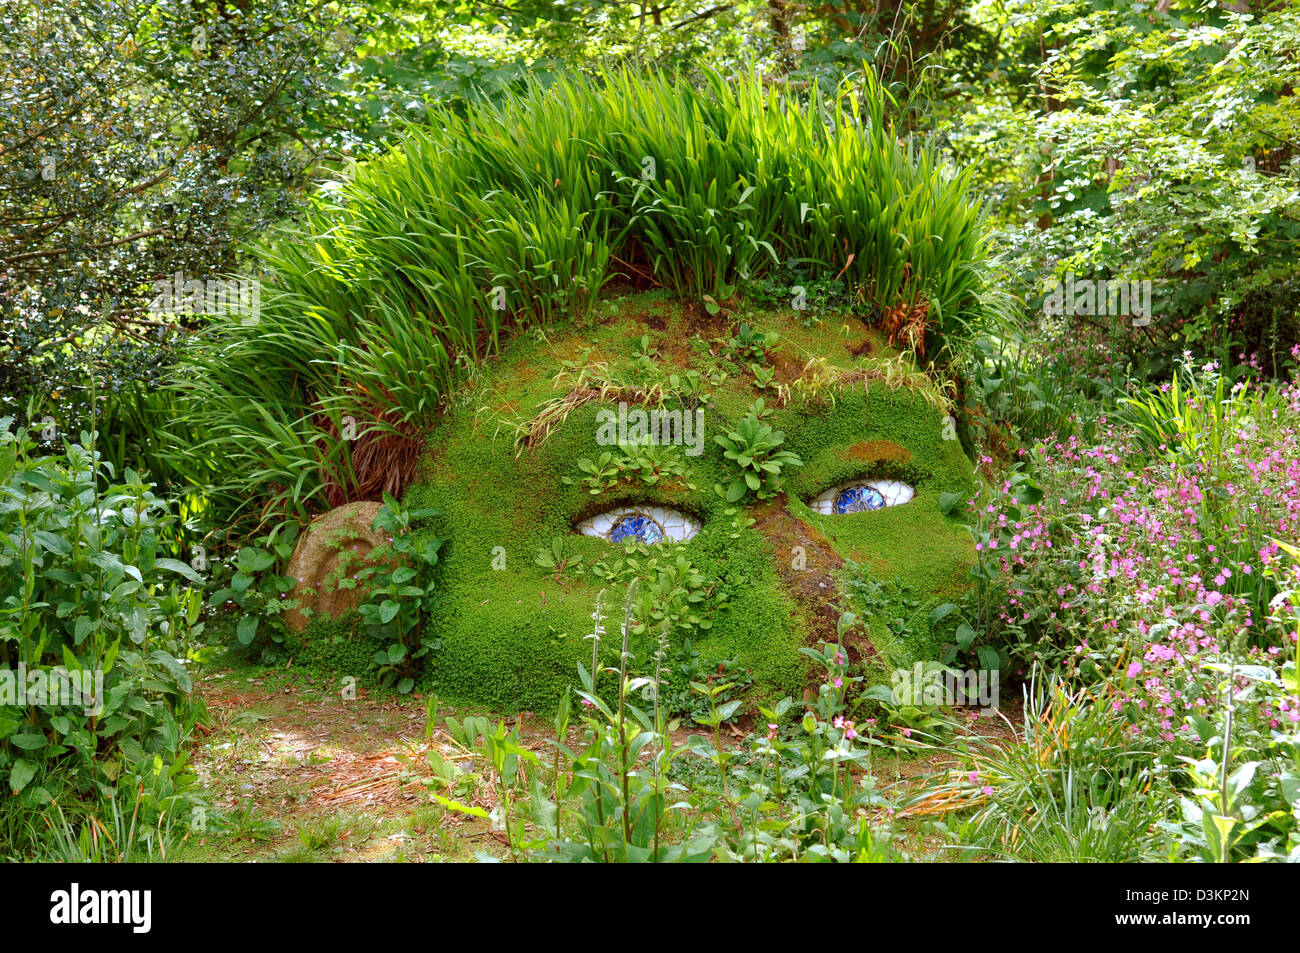 (dpa) - The picture shows the so-called Giant Head in 'The lost Gardens of Heligan' in Pentawan close to St. Austell, England, 29 May 2005. The garden sculpture was planted on a tree root. The garden is part of a manor and was a 'Sleeping Beauty' since it was forgotten for 75 years and only discovered in 1990. After extensive works the garden was opened for public in 1992. Photo: F Stock Photo